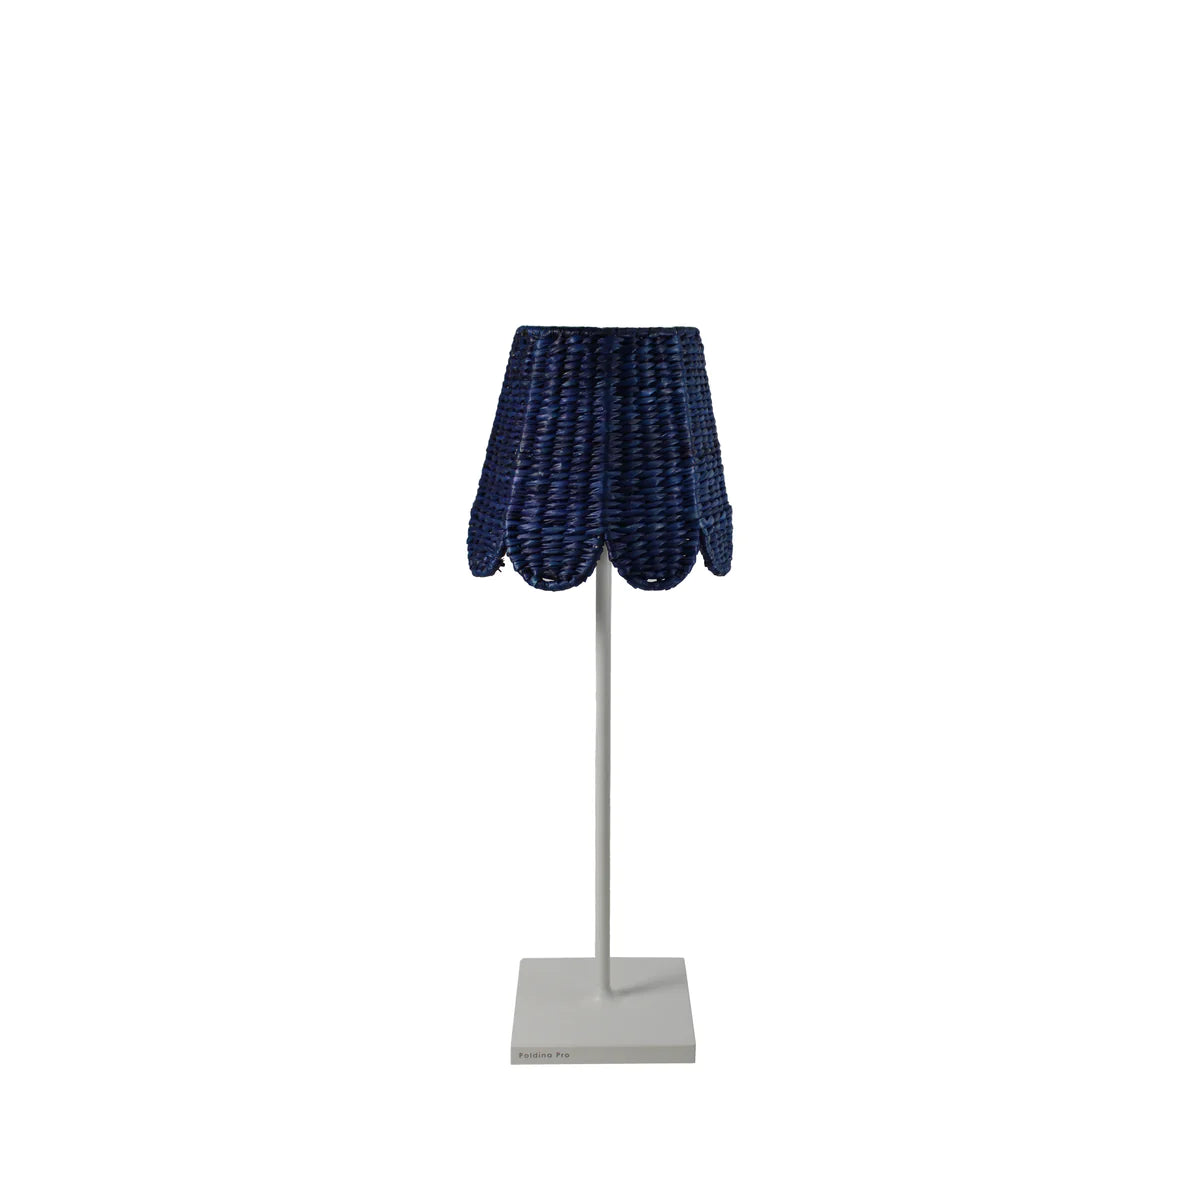 Small Scalloped Navy Seagrass Lampshade for Poldina Pro Lamp